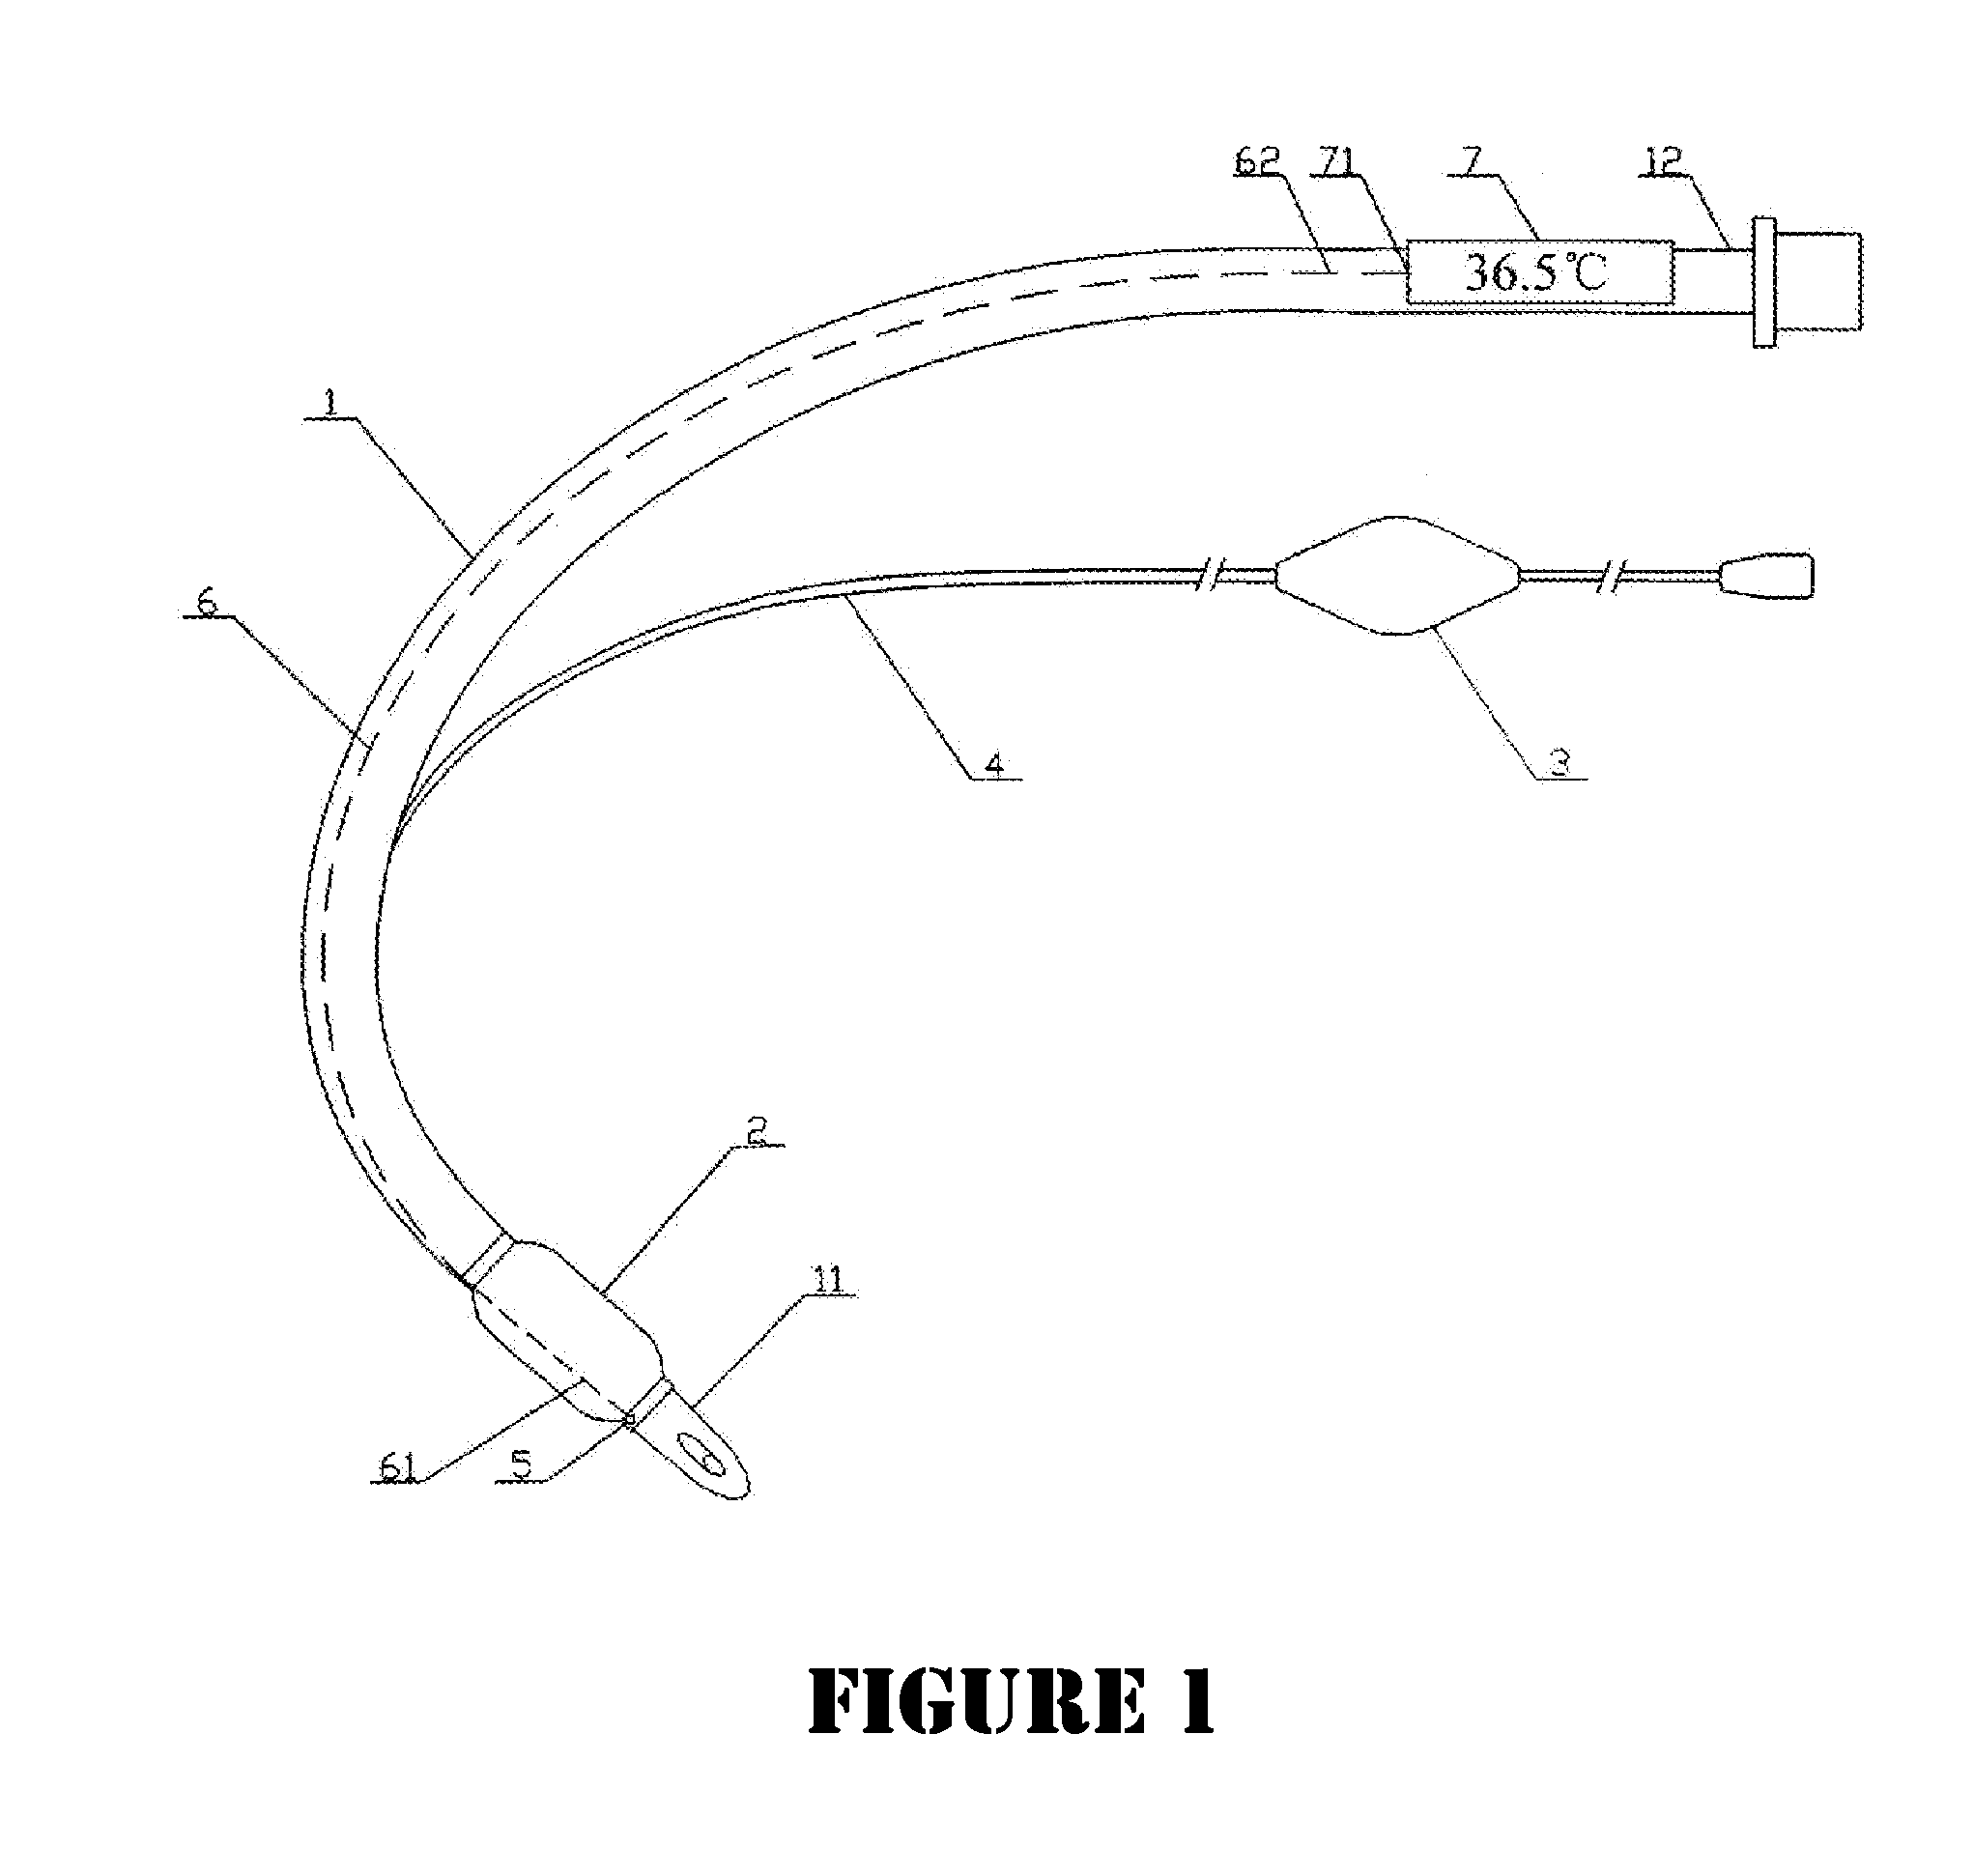 Artificial Airway with Integrated Core Temperature Monitor